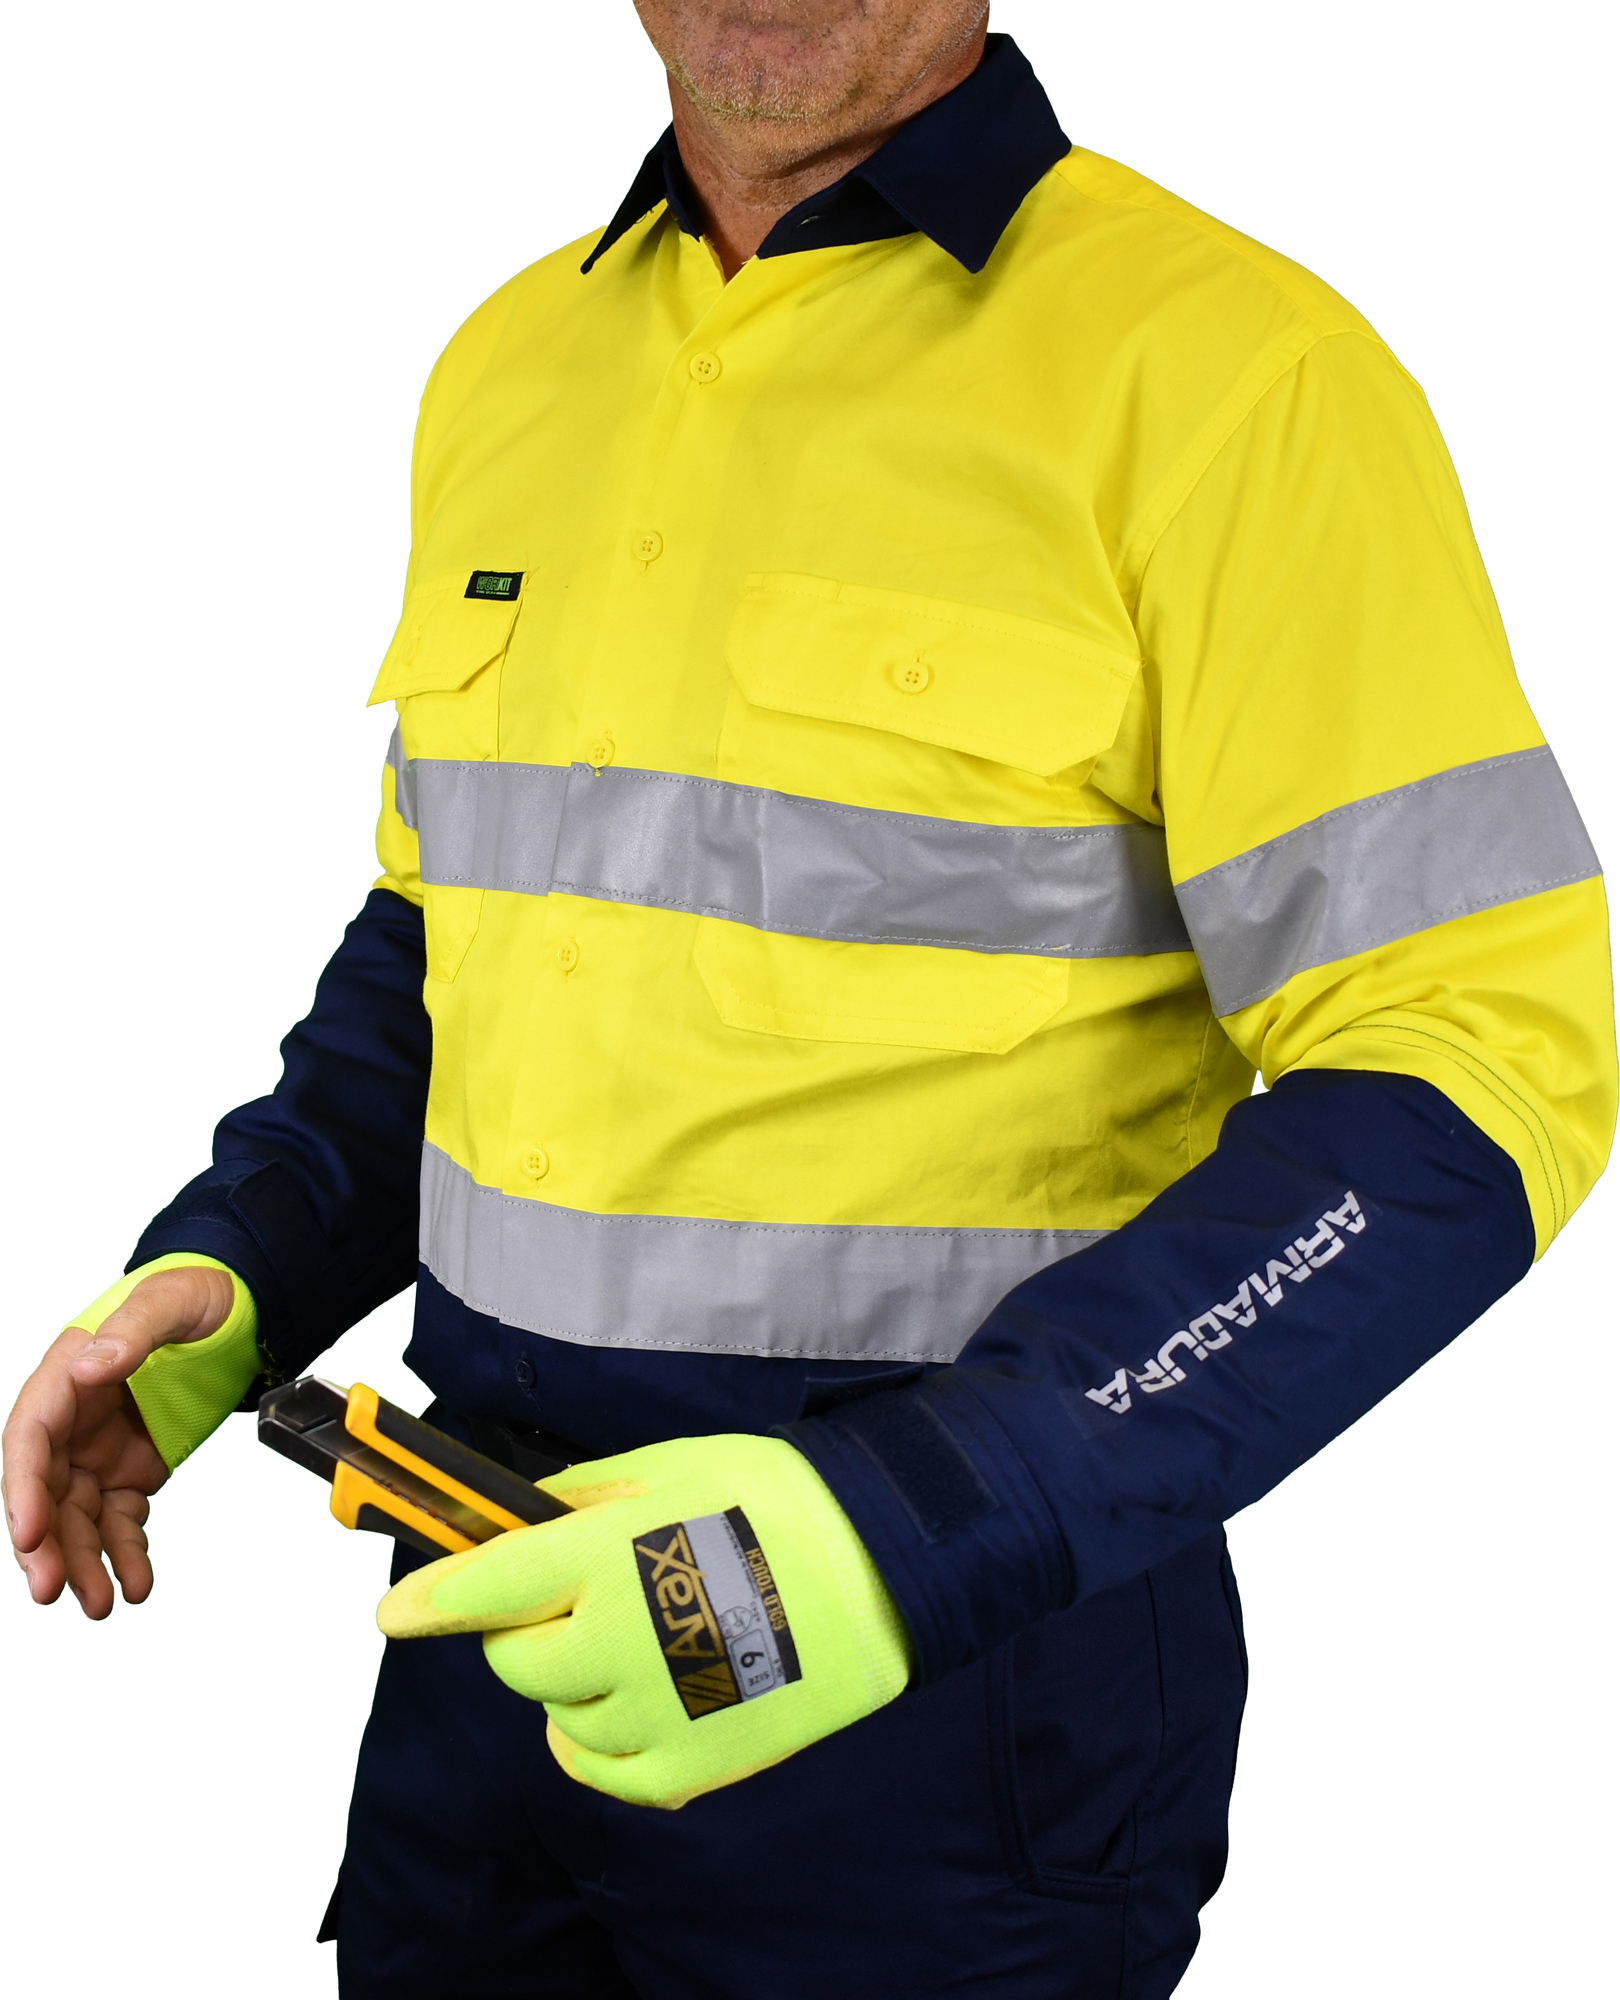 2613 Hi-Vis Lightweight Work Shirts, Armadura panels integrated from the wrist to above the elbow